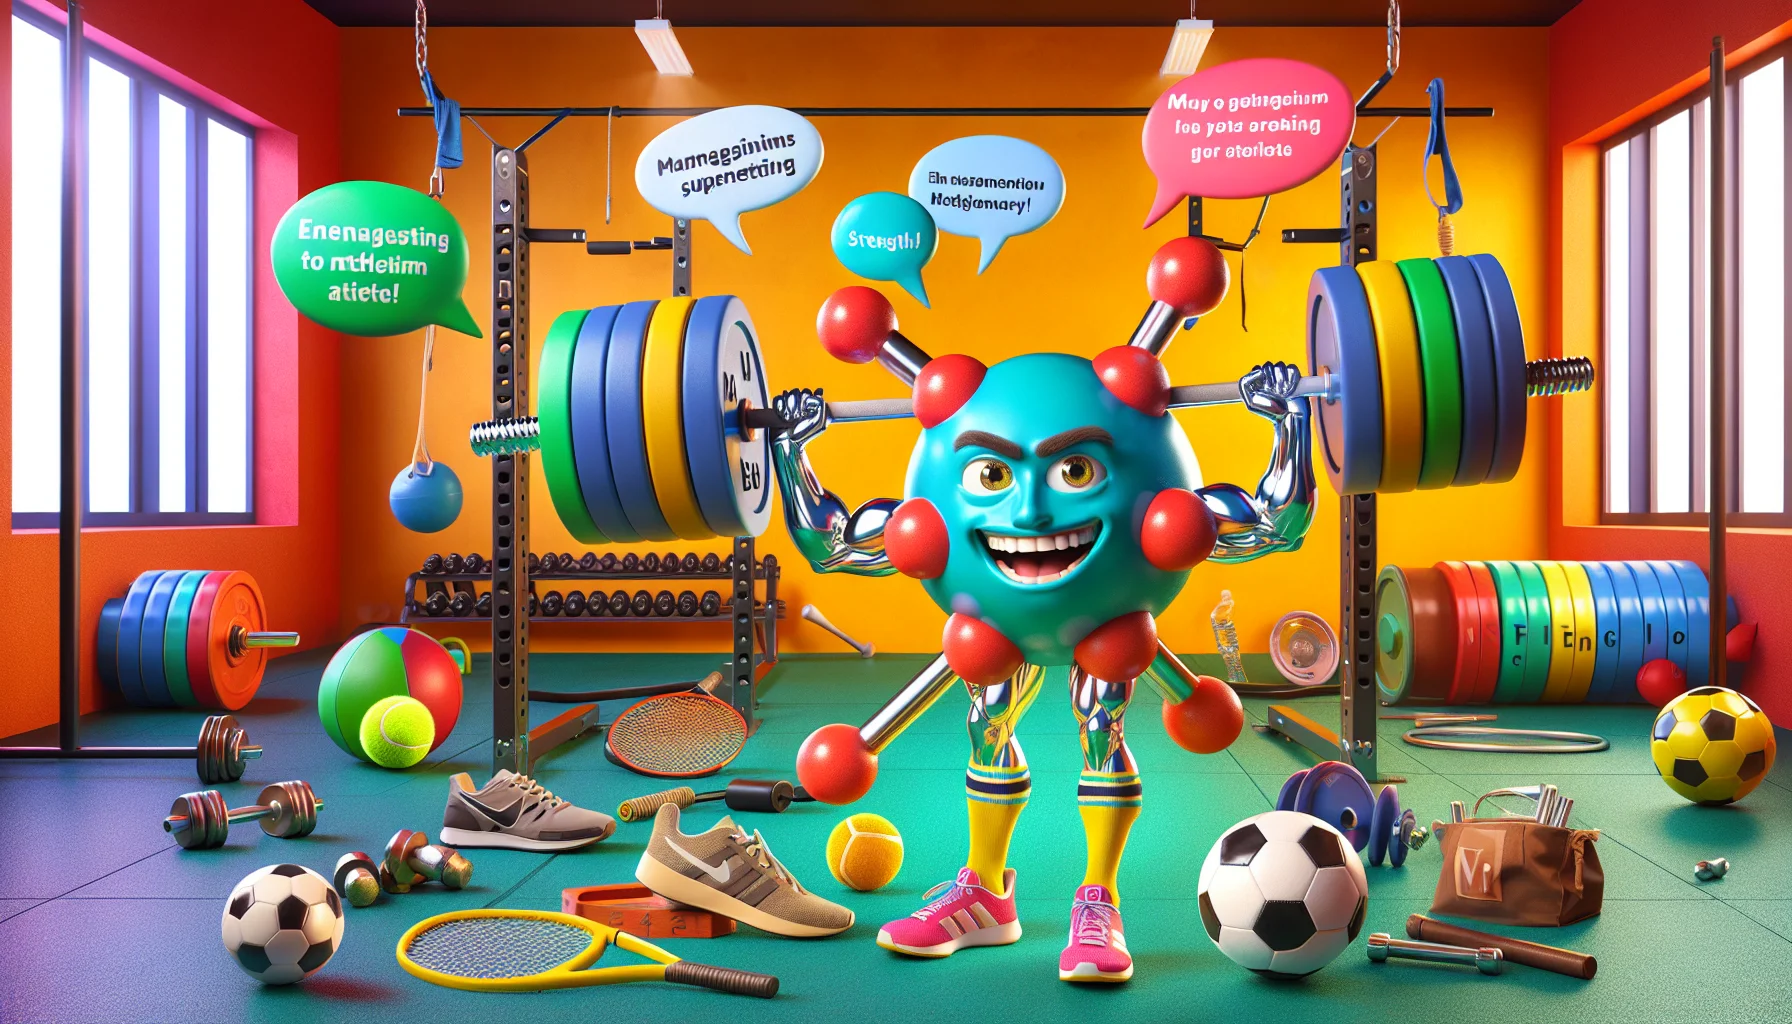 Generate a comedic image of a Bohr model of a magnesium atom, personified with vibrant outfits and athletic gear. The atom is lifting weights, symbolizing strength, and is surrounded by various sports equipment like tennis rackets, soccer balls, and running shoes. The background is a vibrant gym. Text bubbles appear around the atom expressing humorous phrases encouraging the use of magnesium supplements for athletic performance. Note: The image should be realistic and visually appealing to capture viewers' interest.